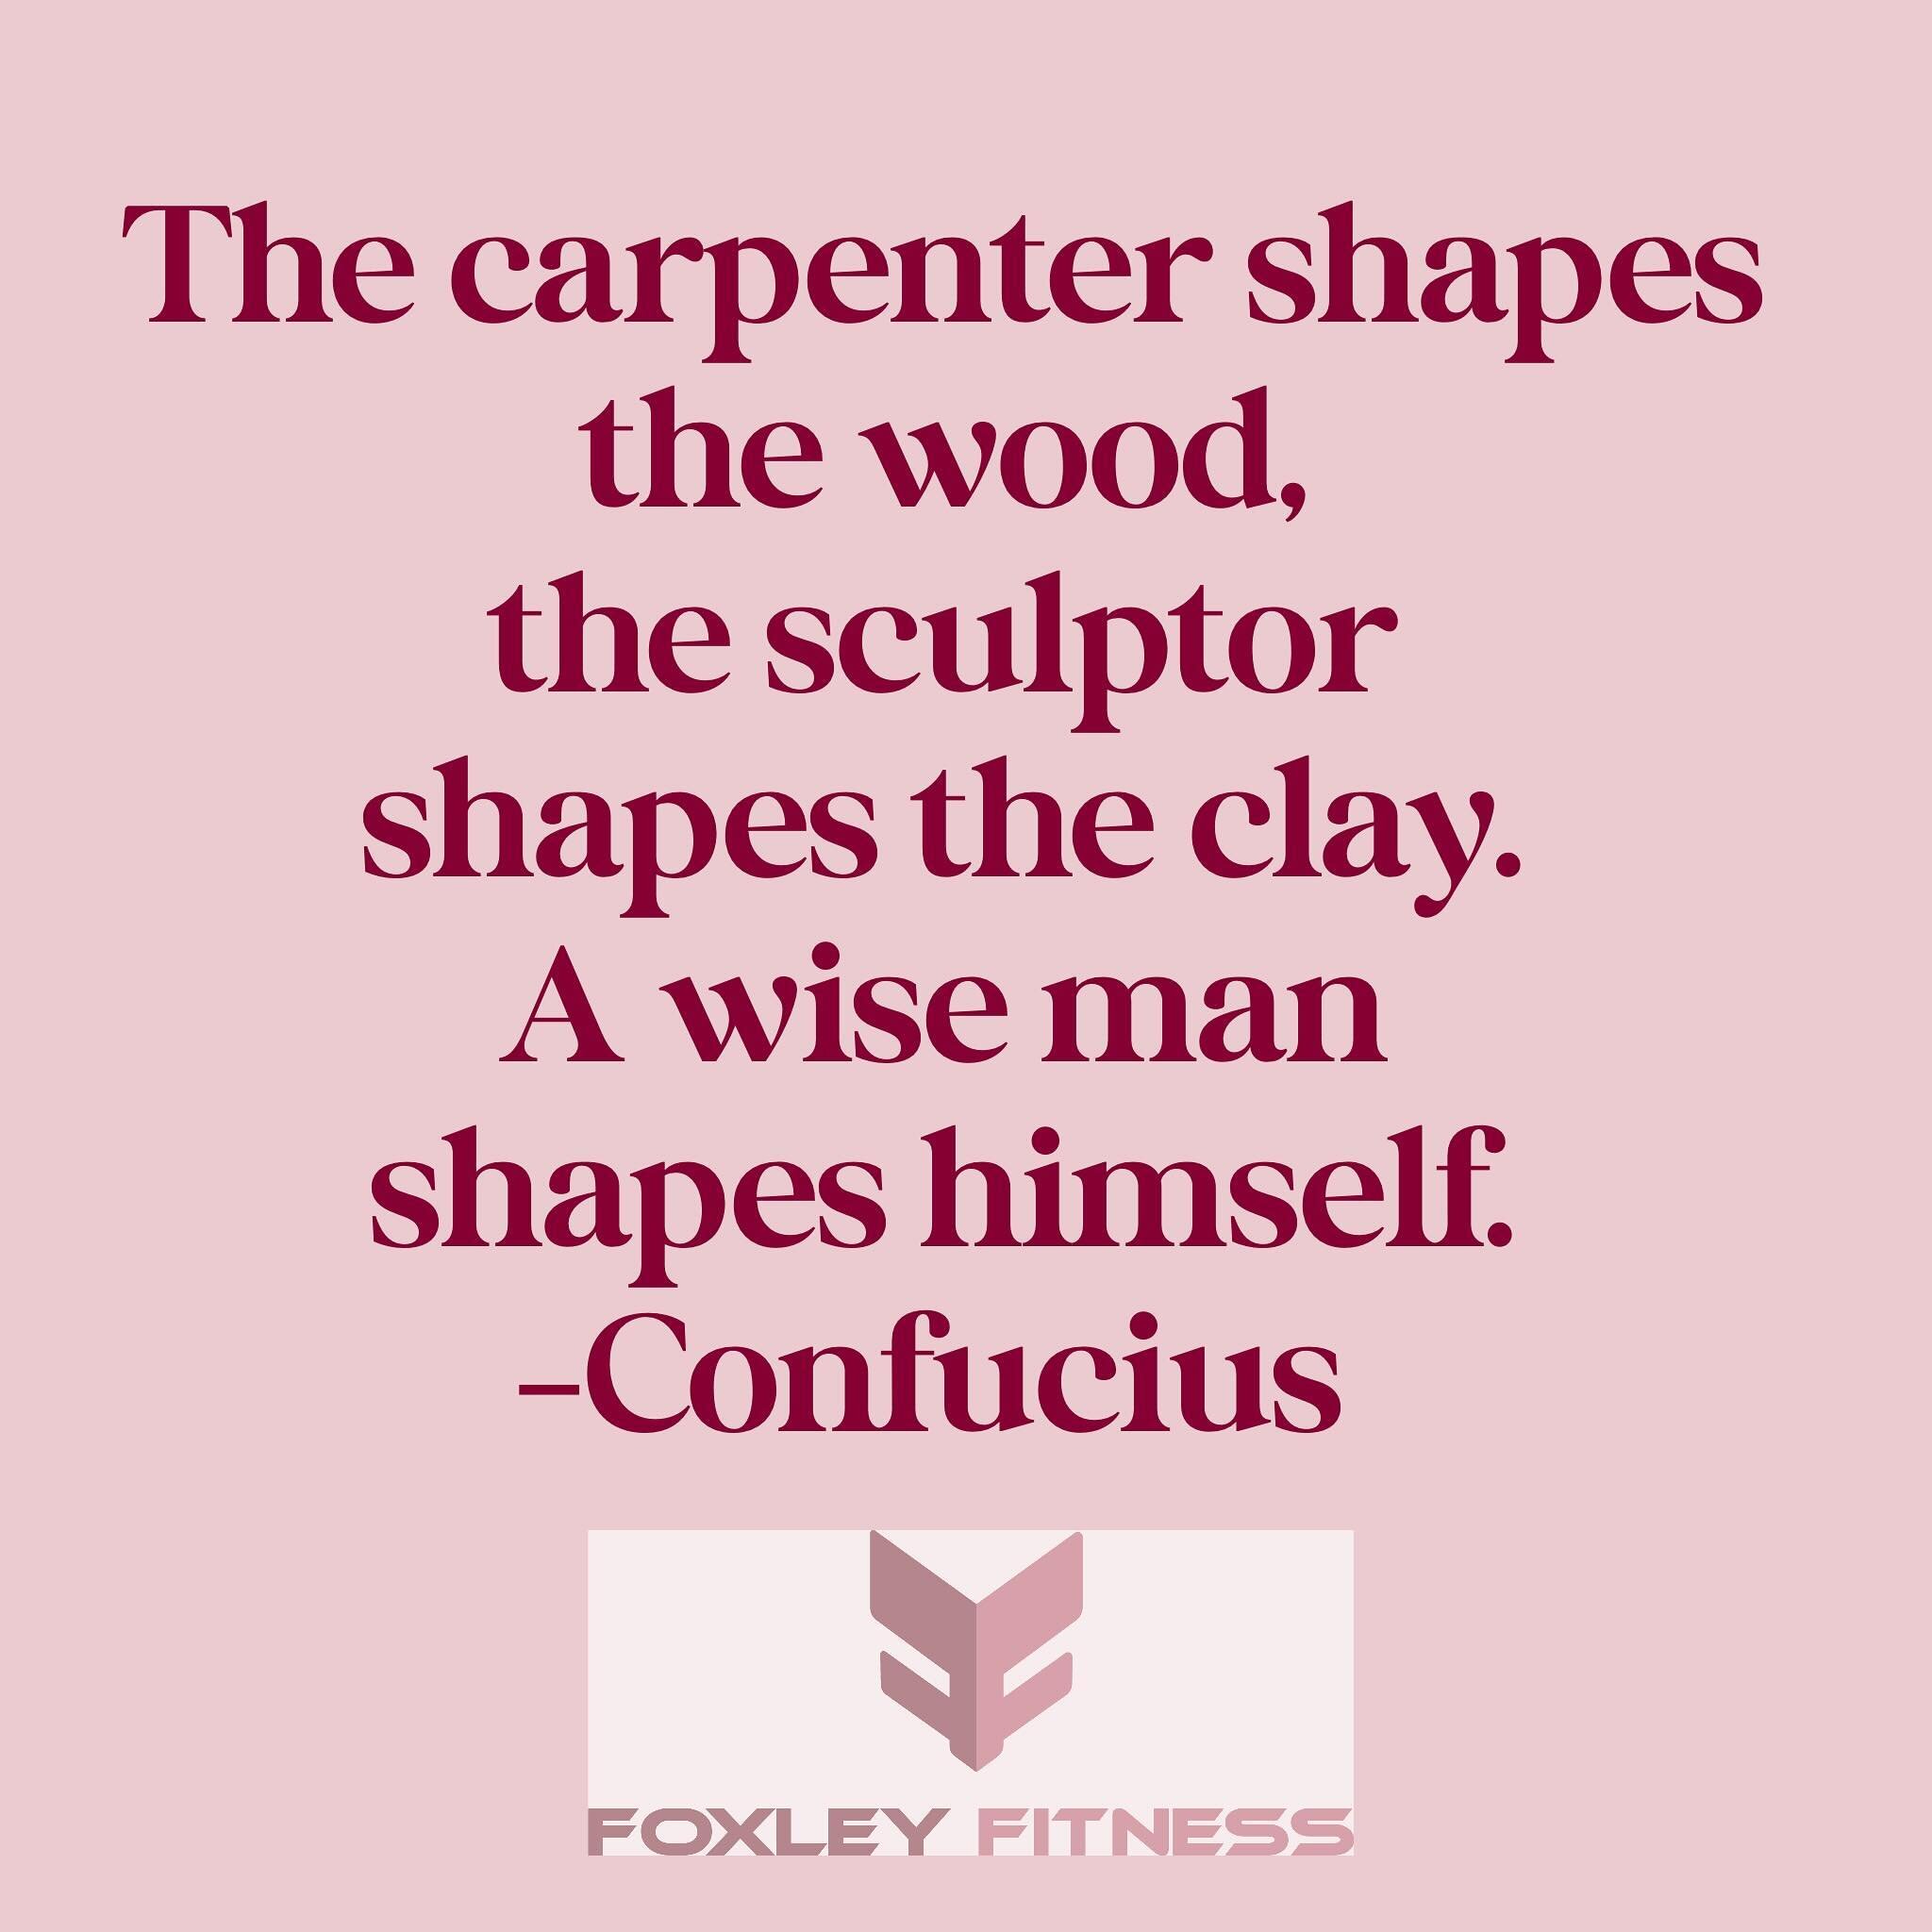 &ldquo;The carpenter shapes the wood, the sculptor shapes the clay. A wise man shapes himself&rdquo;-Confucius 
#life #lifecoaching #lifecoach #confuciusquotes #blogger #author #hypnotherapist